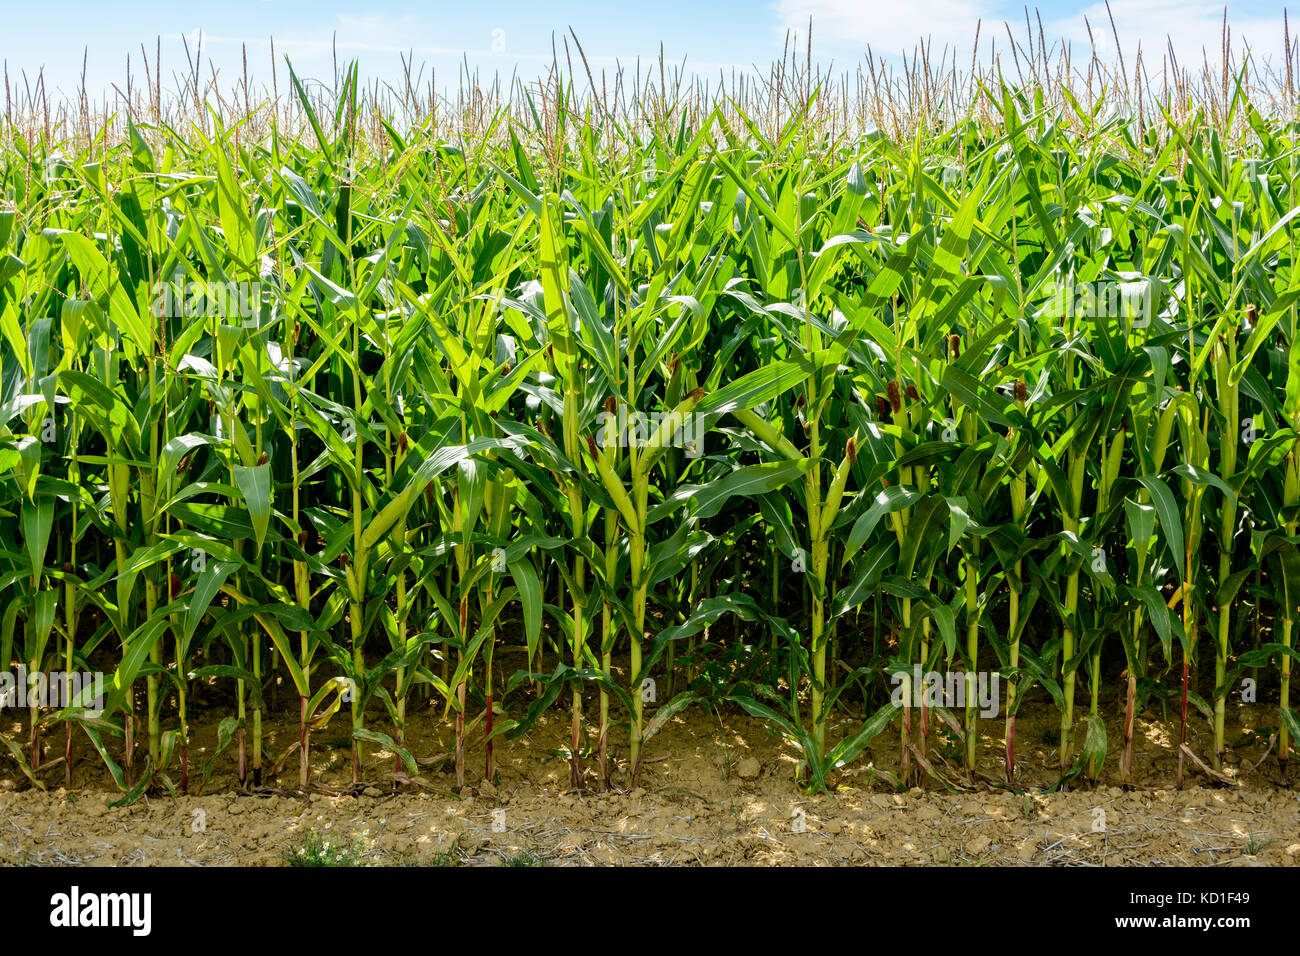 Front view of a corn field which plants have reached their maximum height and are between R2 and R3 stage of development. Stock Photo